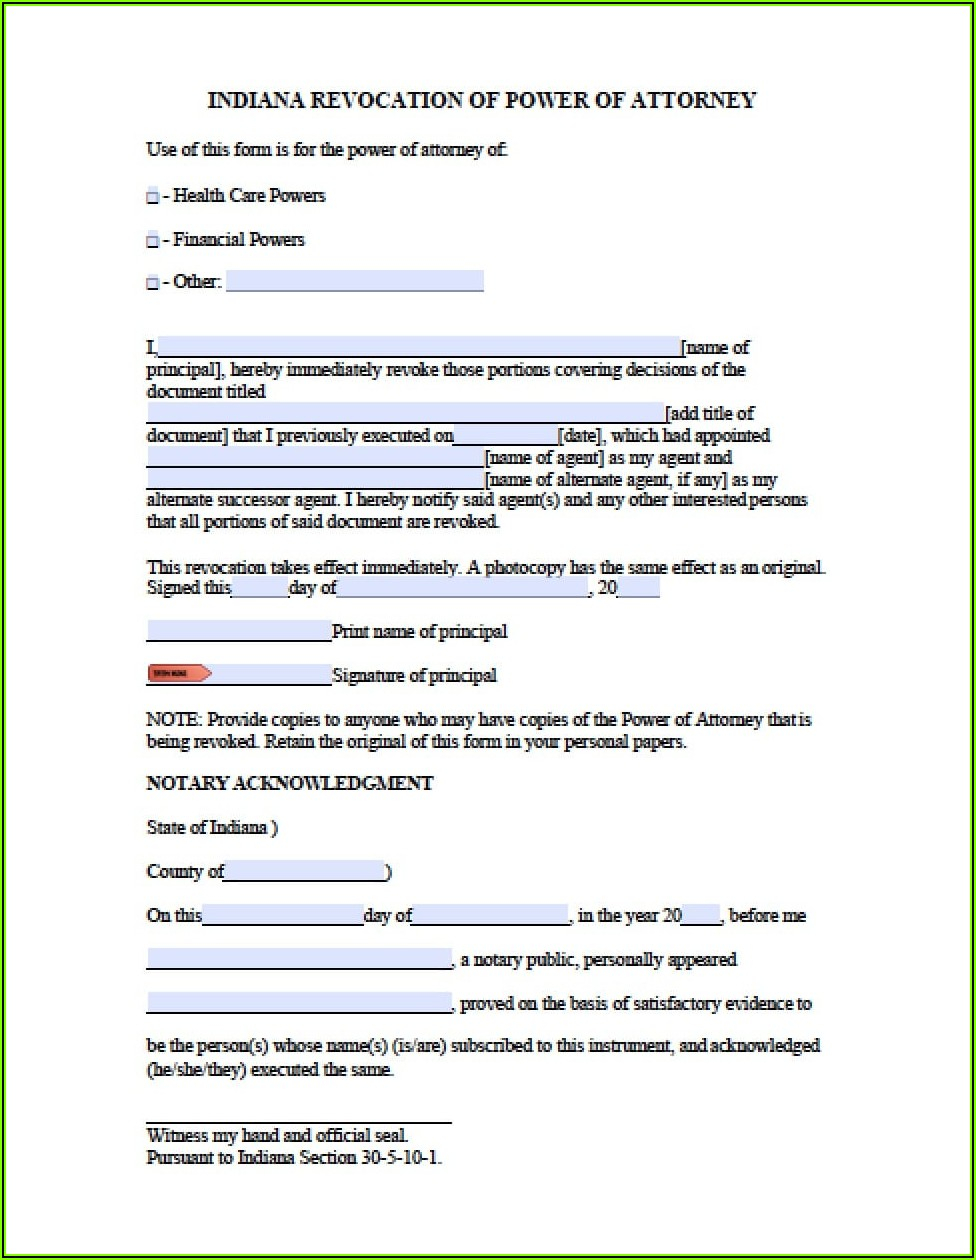 Relinquish Power Of Attorney Sample Letter Form Resume 